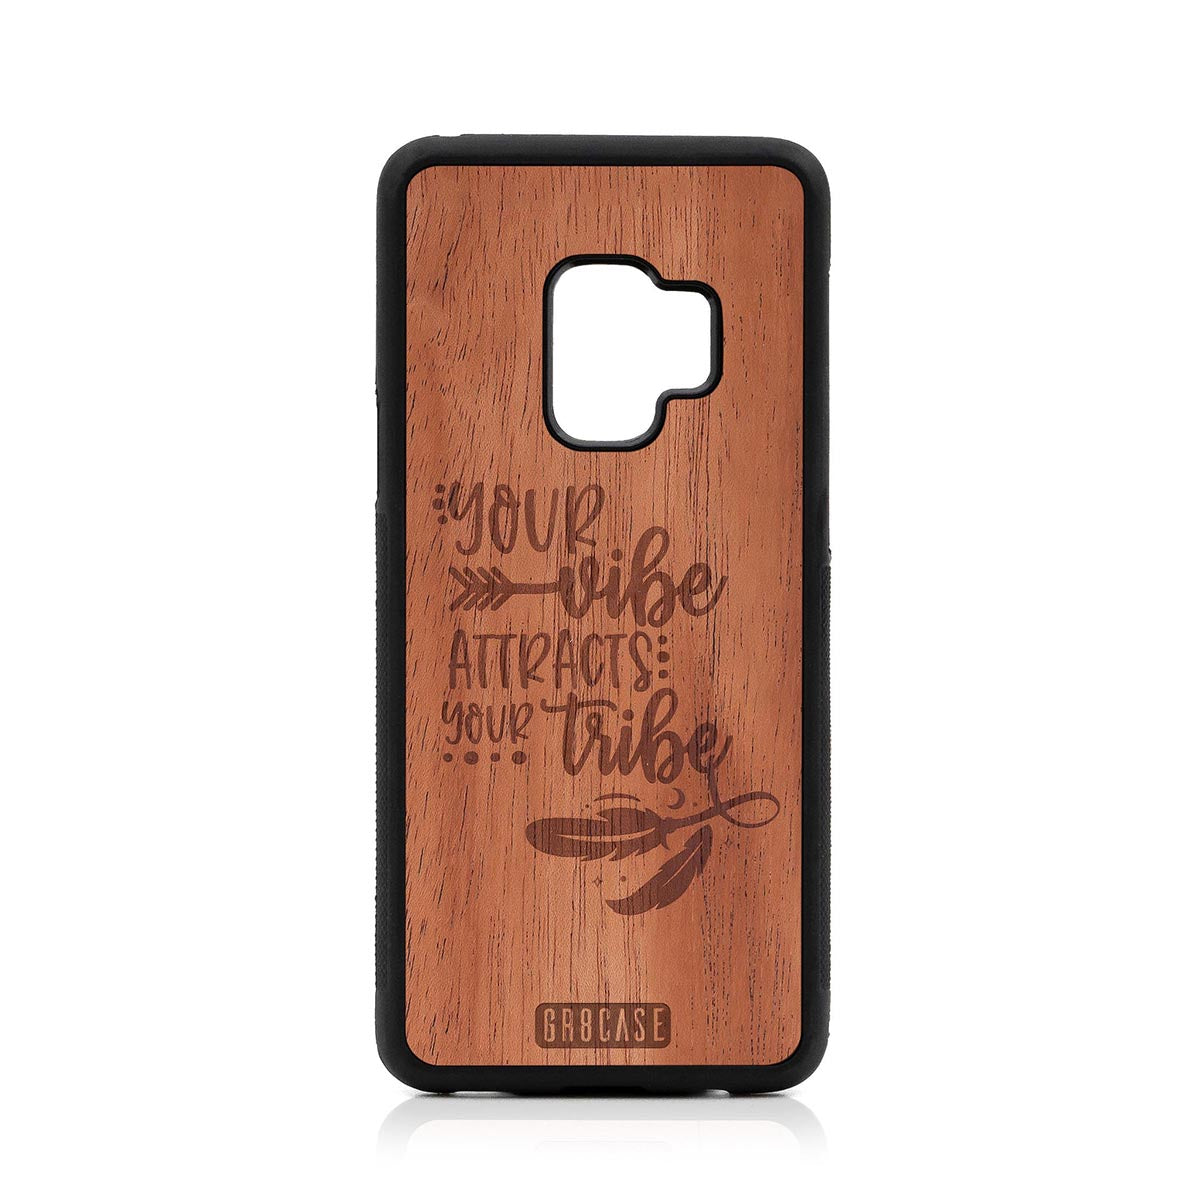 Your Vibe Attracts Your Tribe Design Wood Case Samsung Galaxy S9